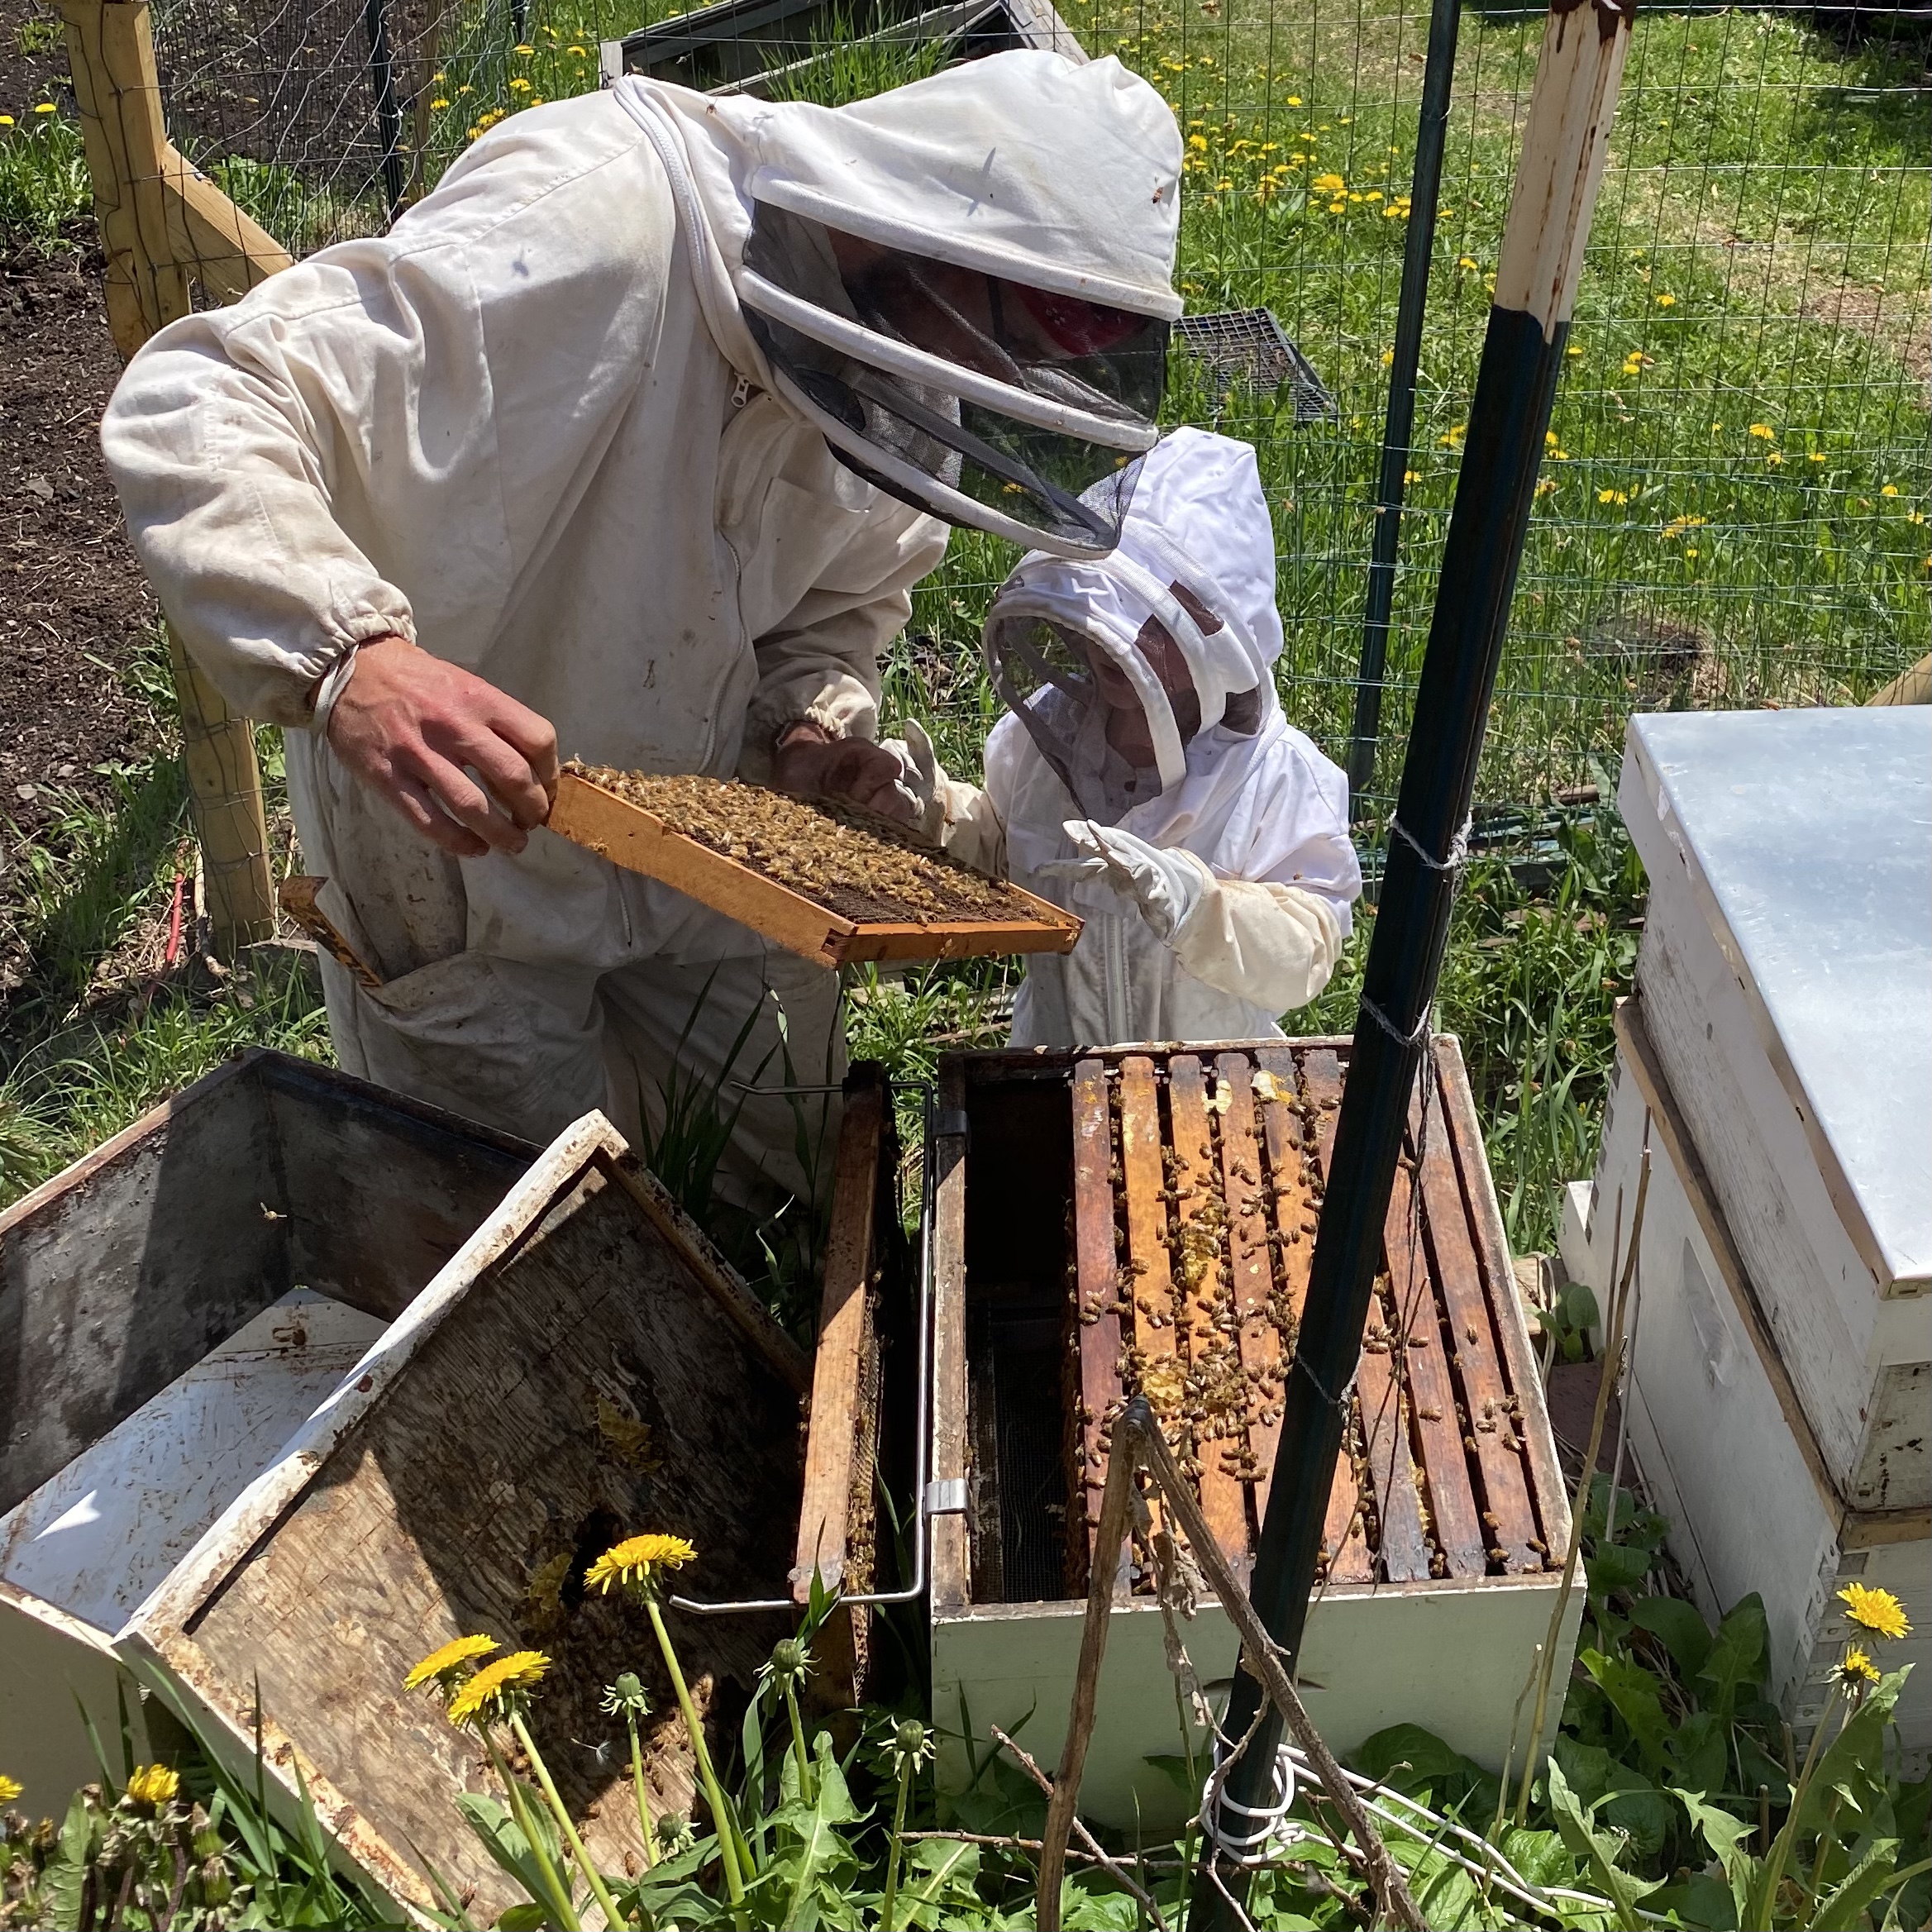 A beekeeper observing their bees